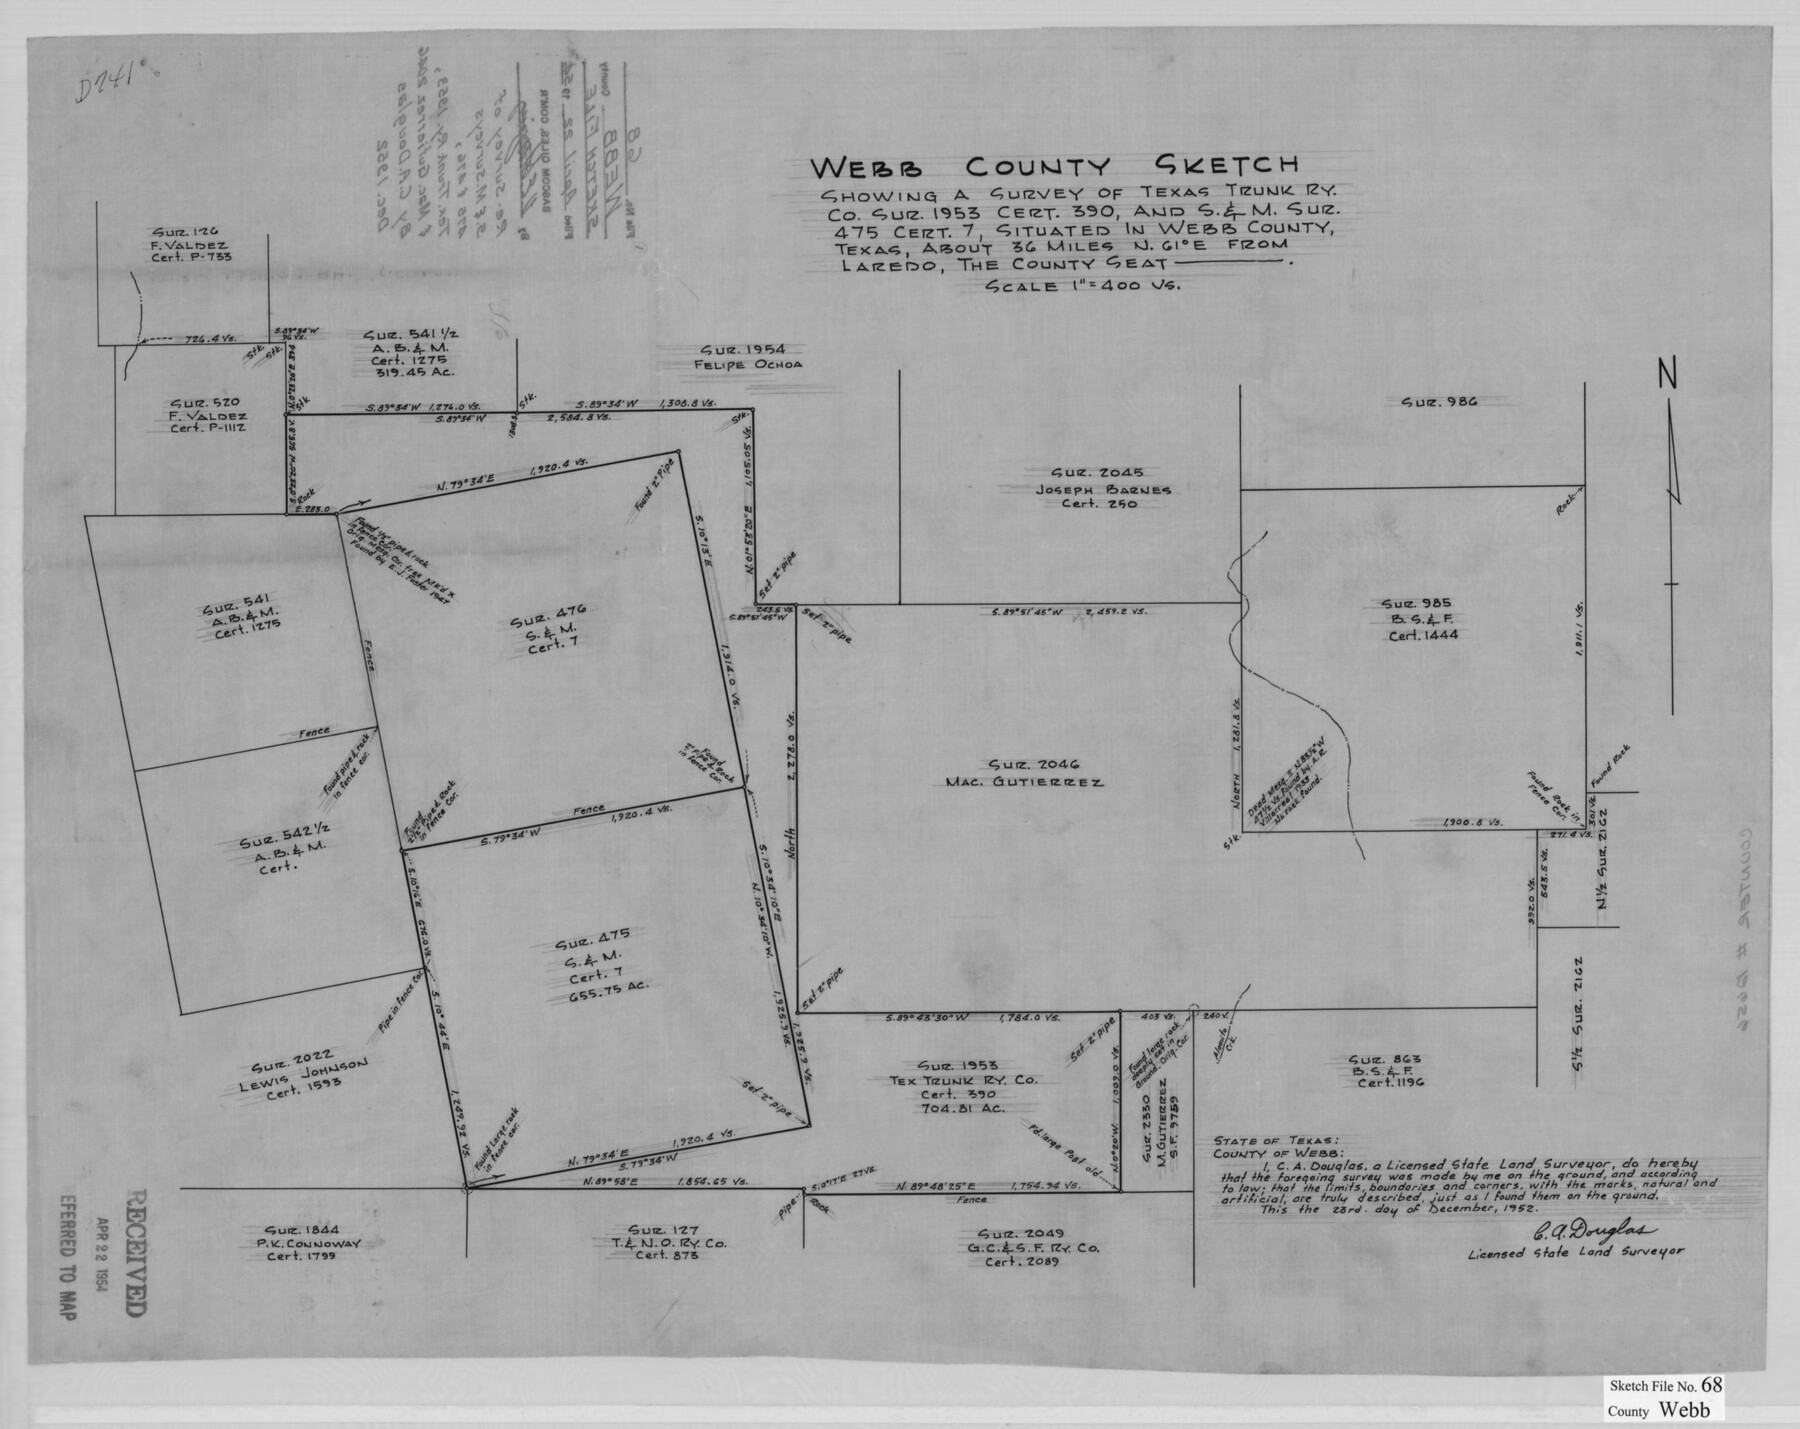 12656, Webb County Sketch File 68, General Map Collection